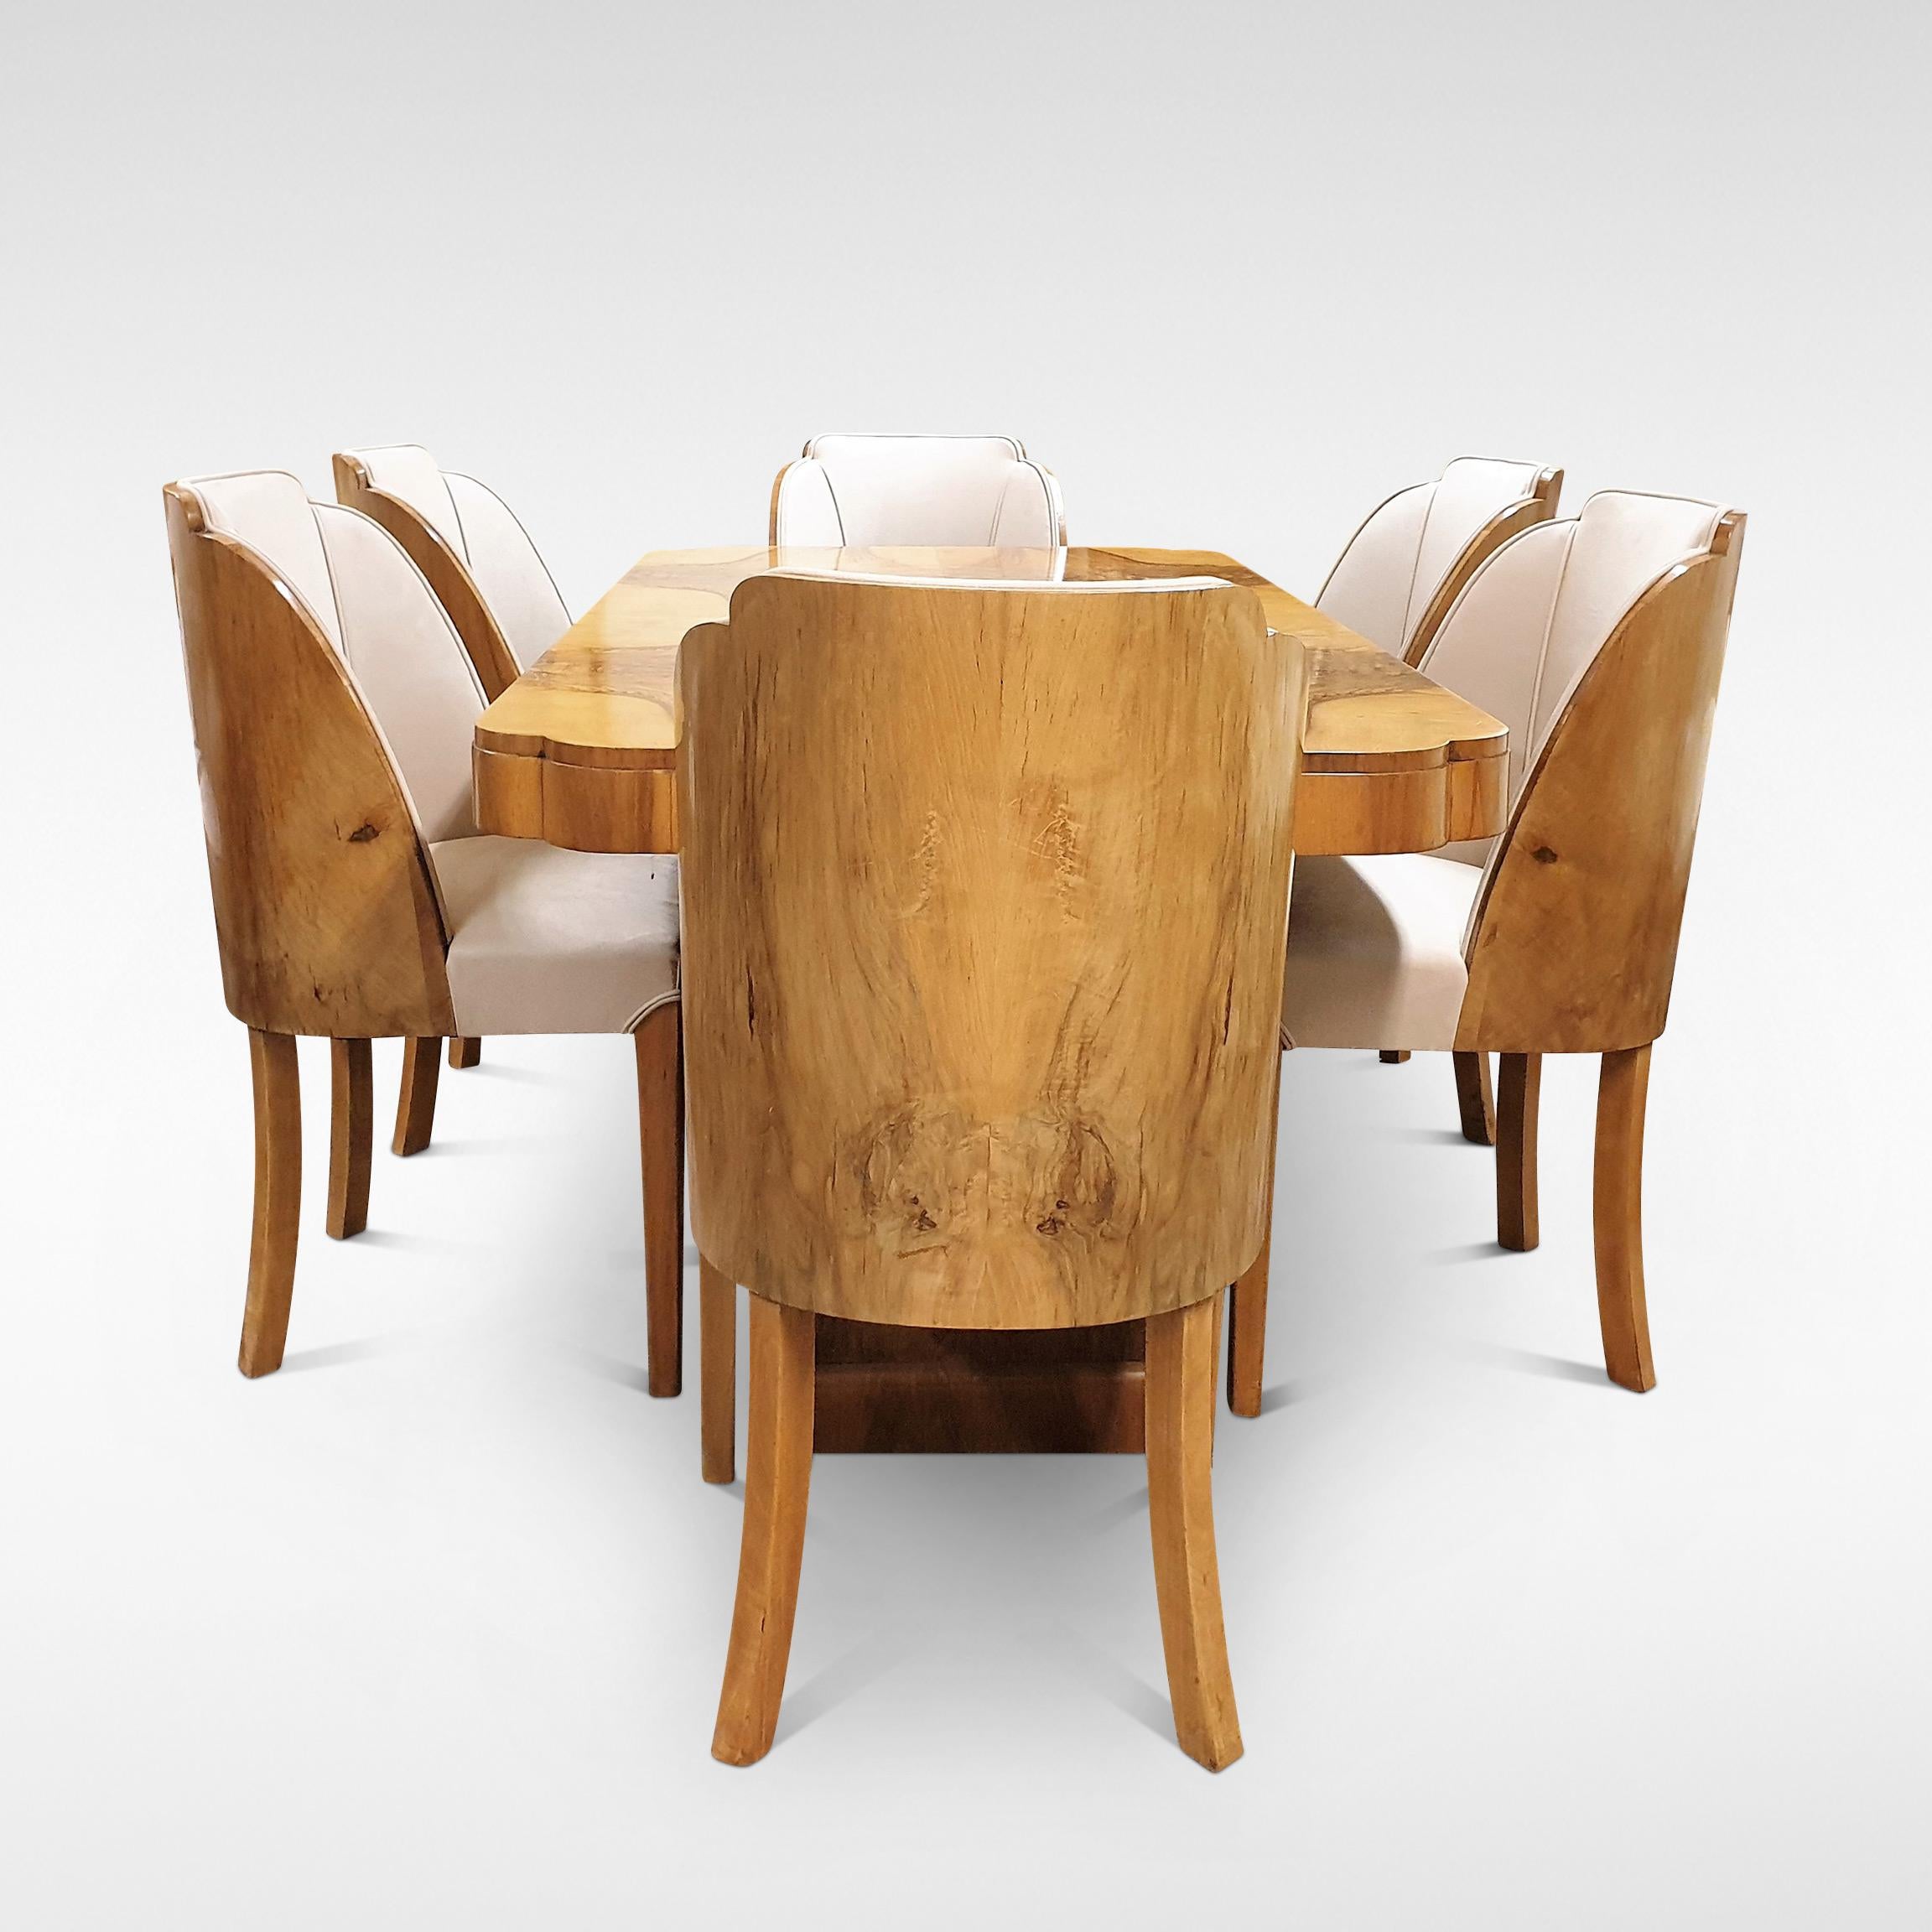 The work of the Epstein family represented a pinnacle of style and quality in English Art Deco furniture. Here we can offer a Dining Suite comprising a 6 seater Table in stunning figured Walnut veneers so characteristic of the Art Deco period,